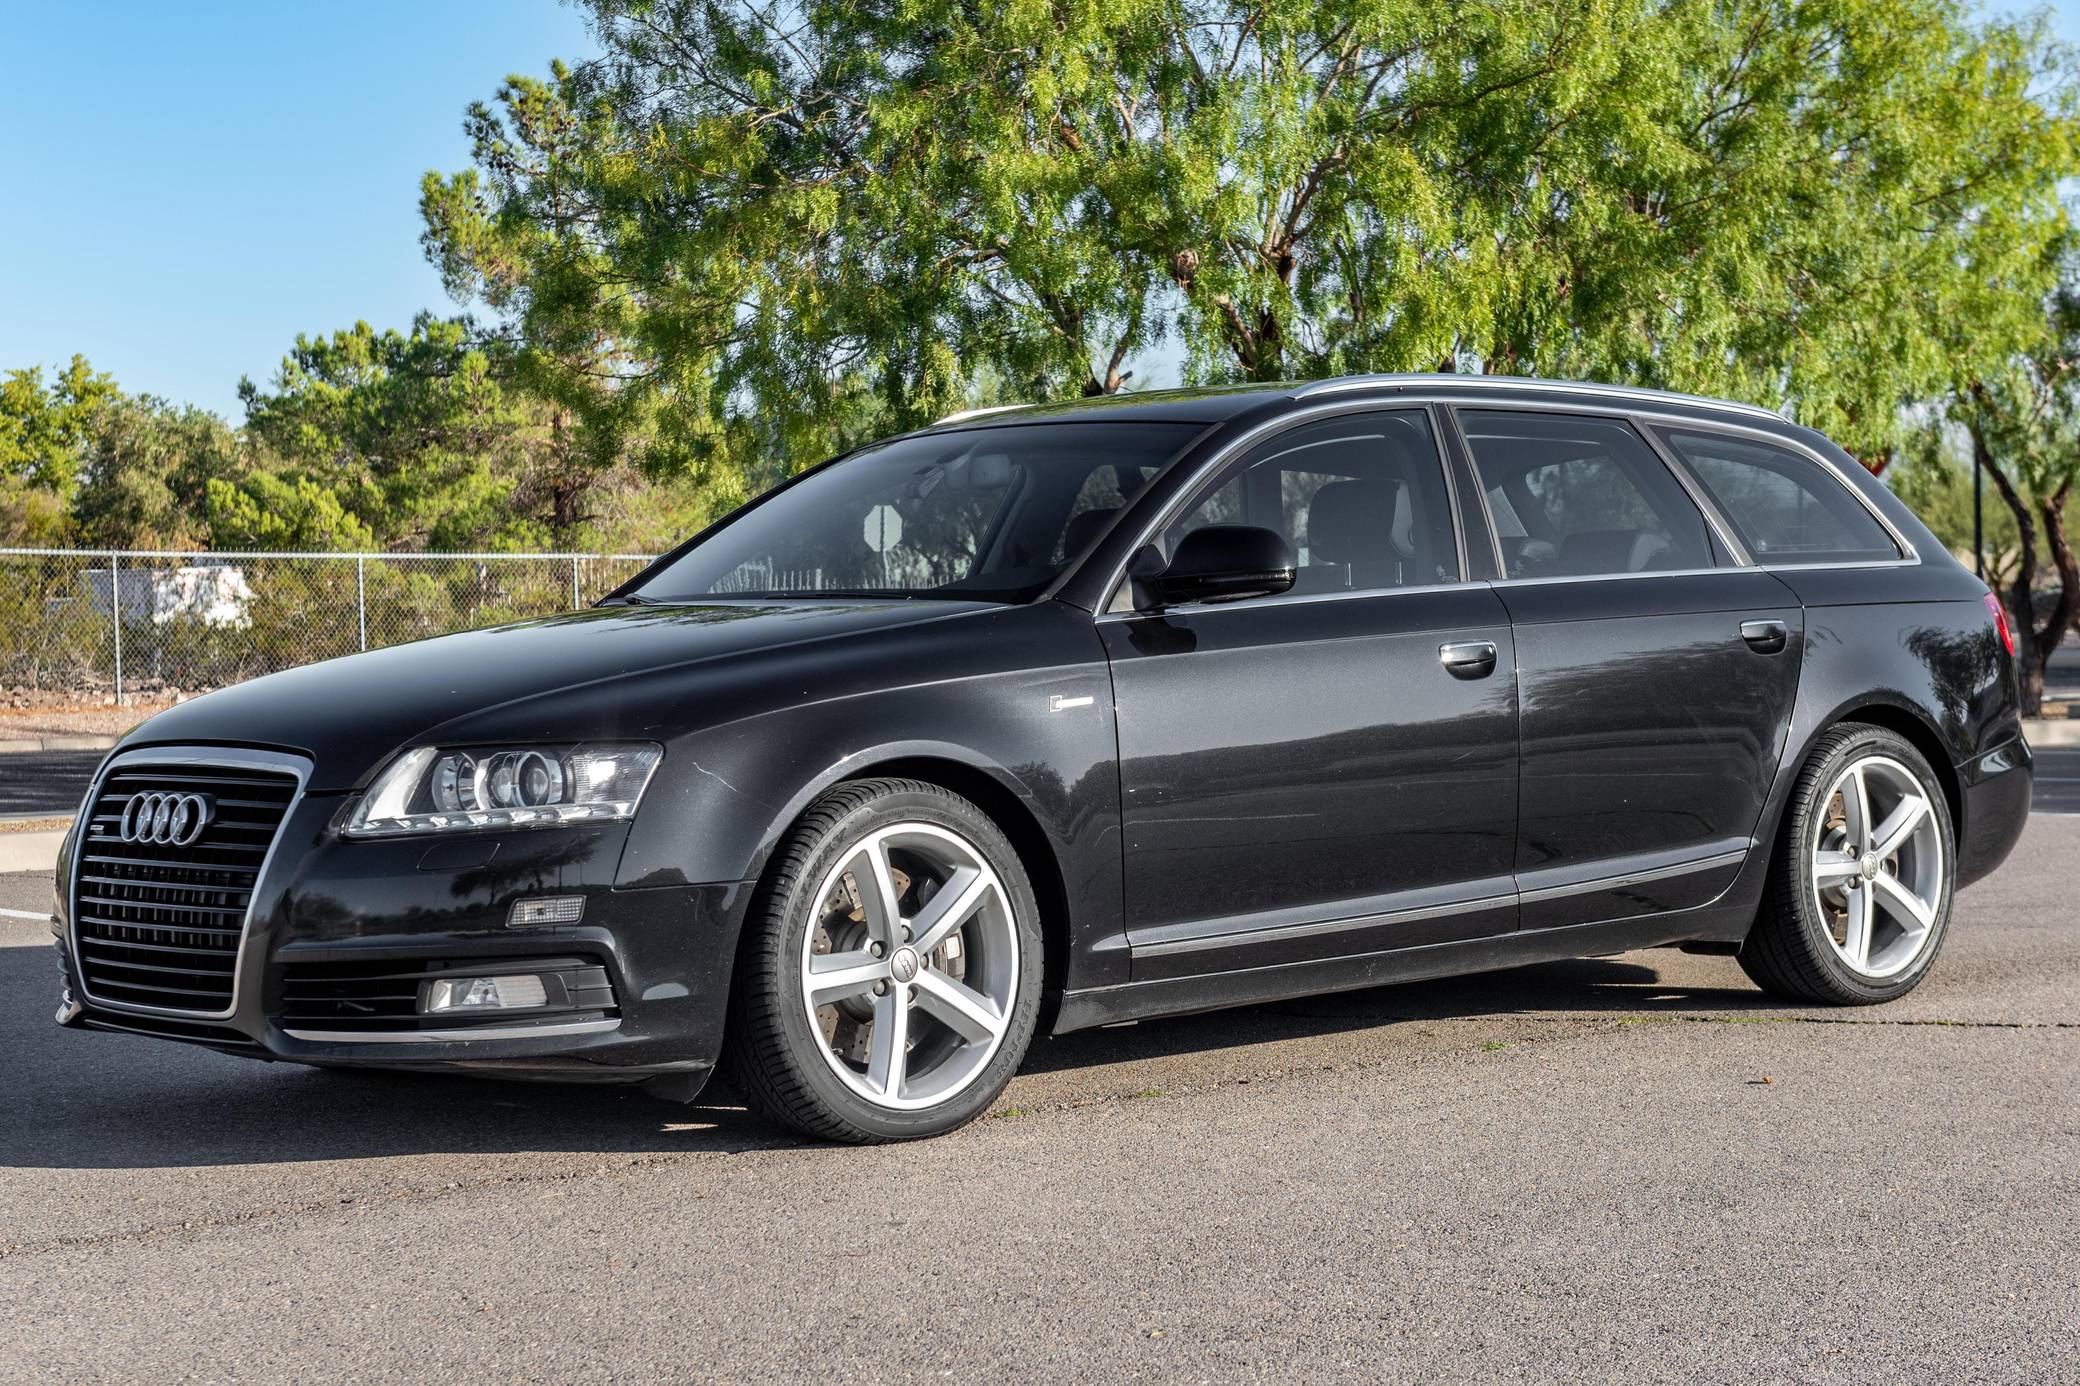 2010 Audi A6 Prices, Reviews, and Photos - MotorTrend